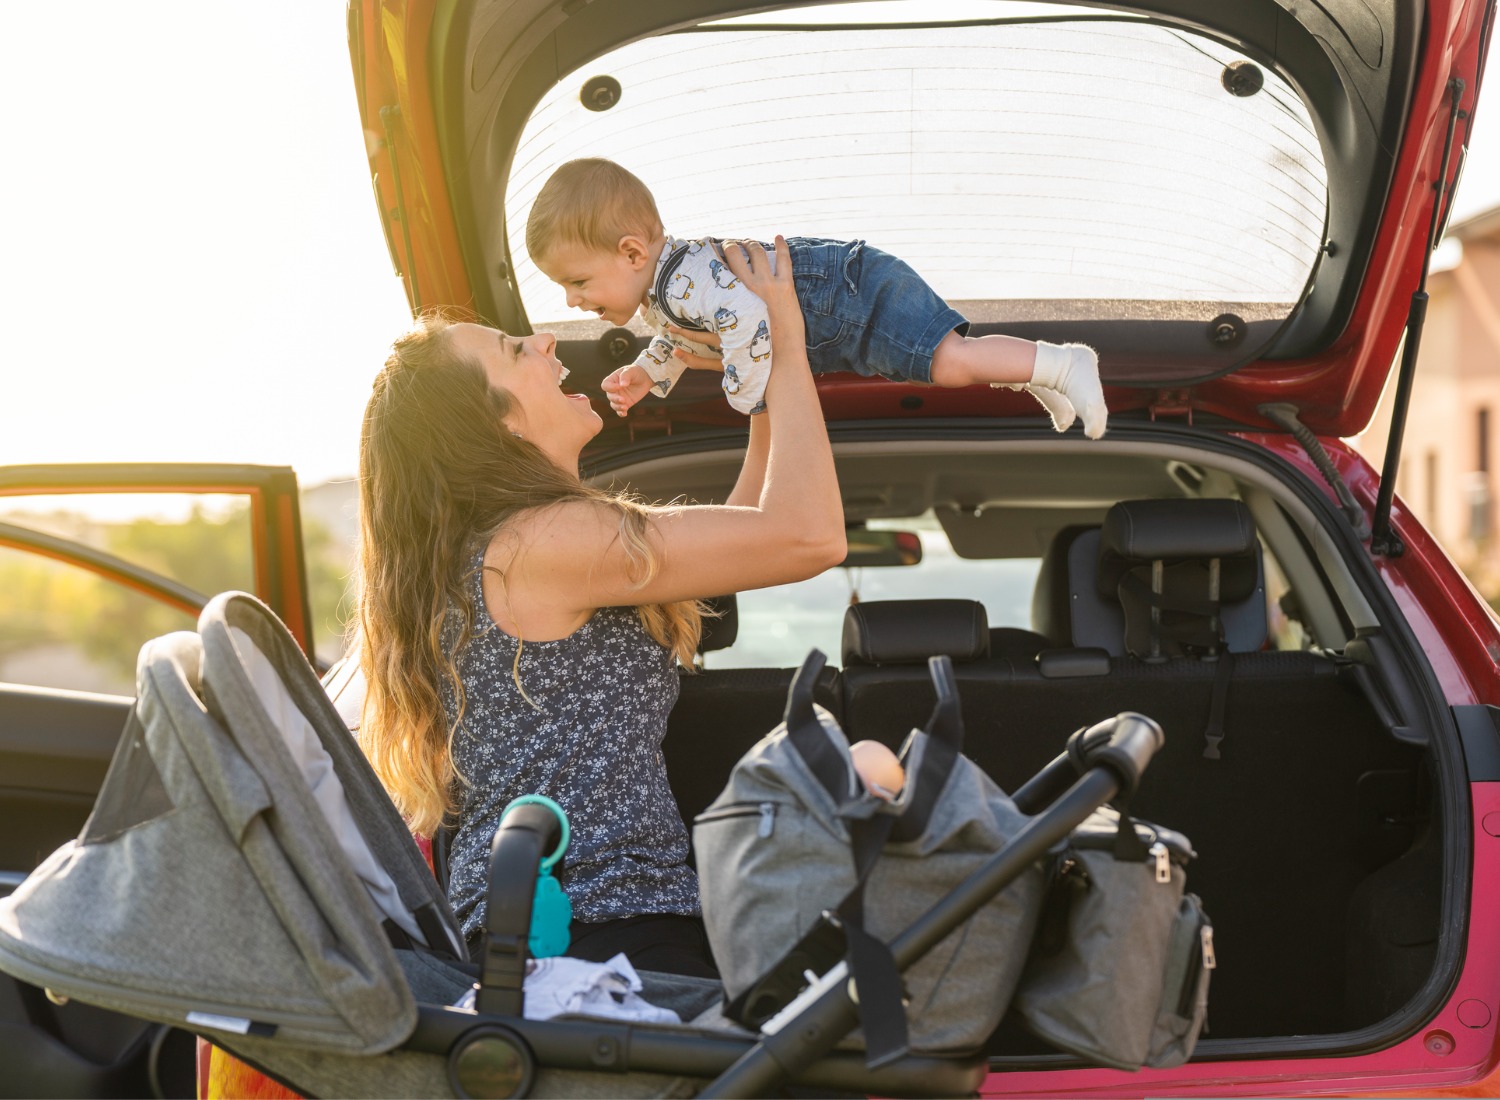 Woman preparing for a trip with her baby